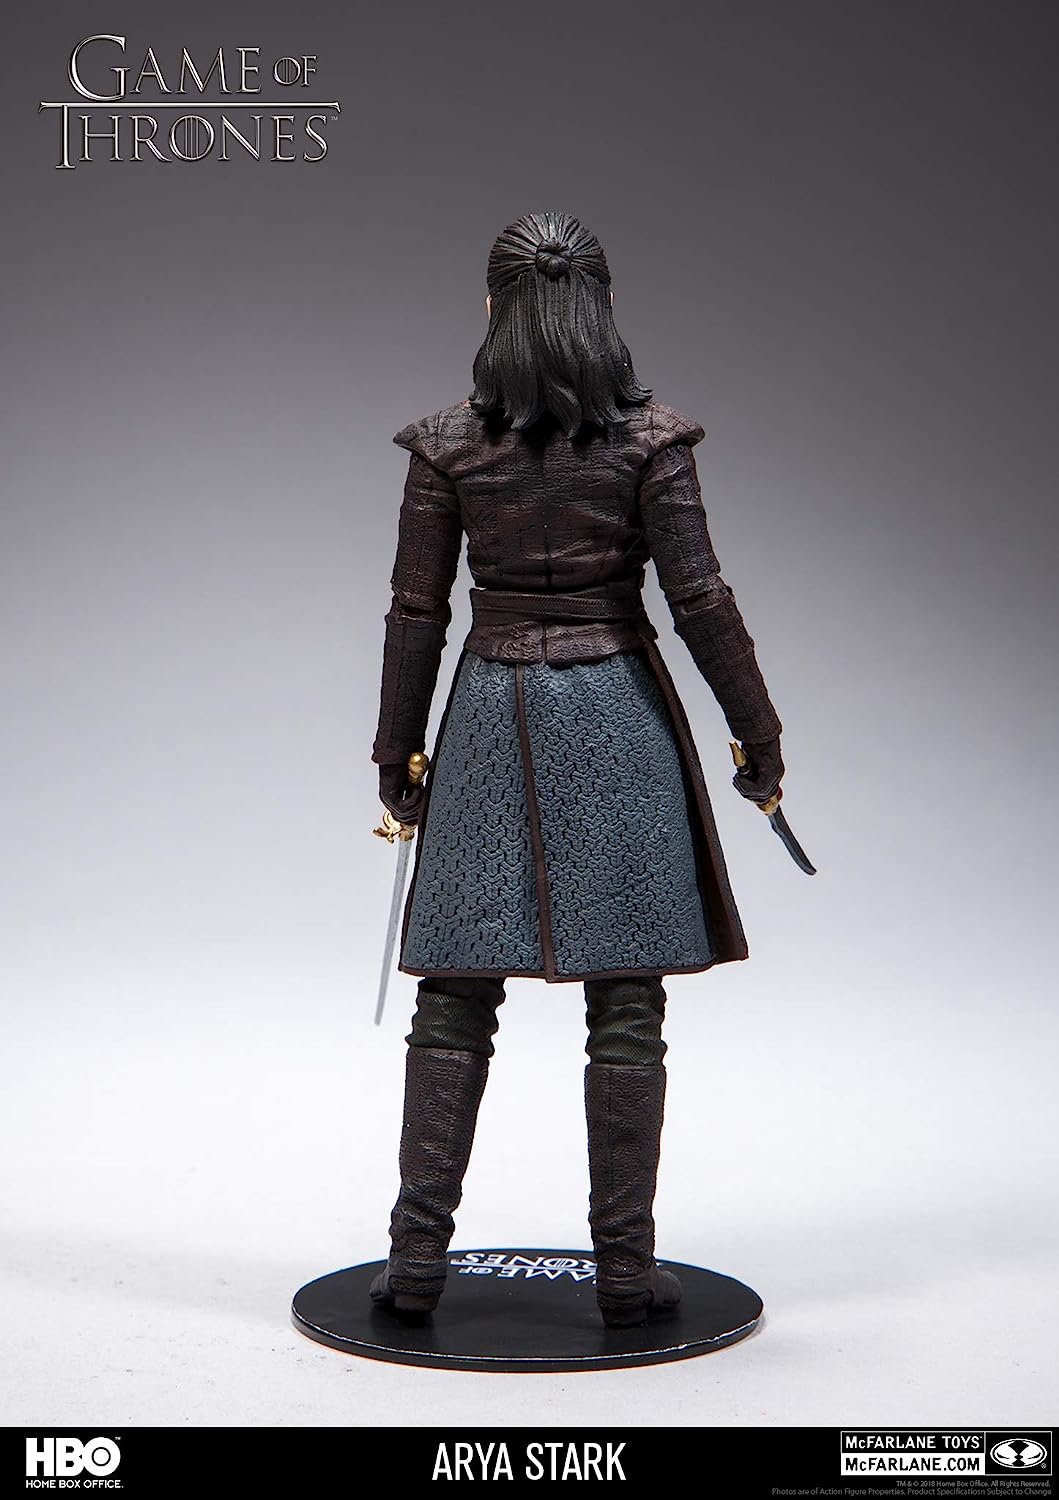 MCFARLANE GAME OF THRONES 6'' ACTION FIGURE: ARYA STARK - 10654-1 - Anotoys Collectibles